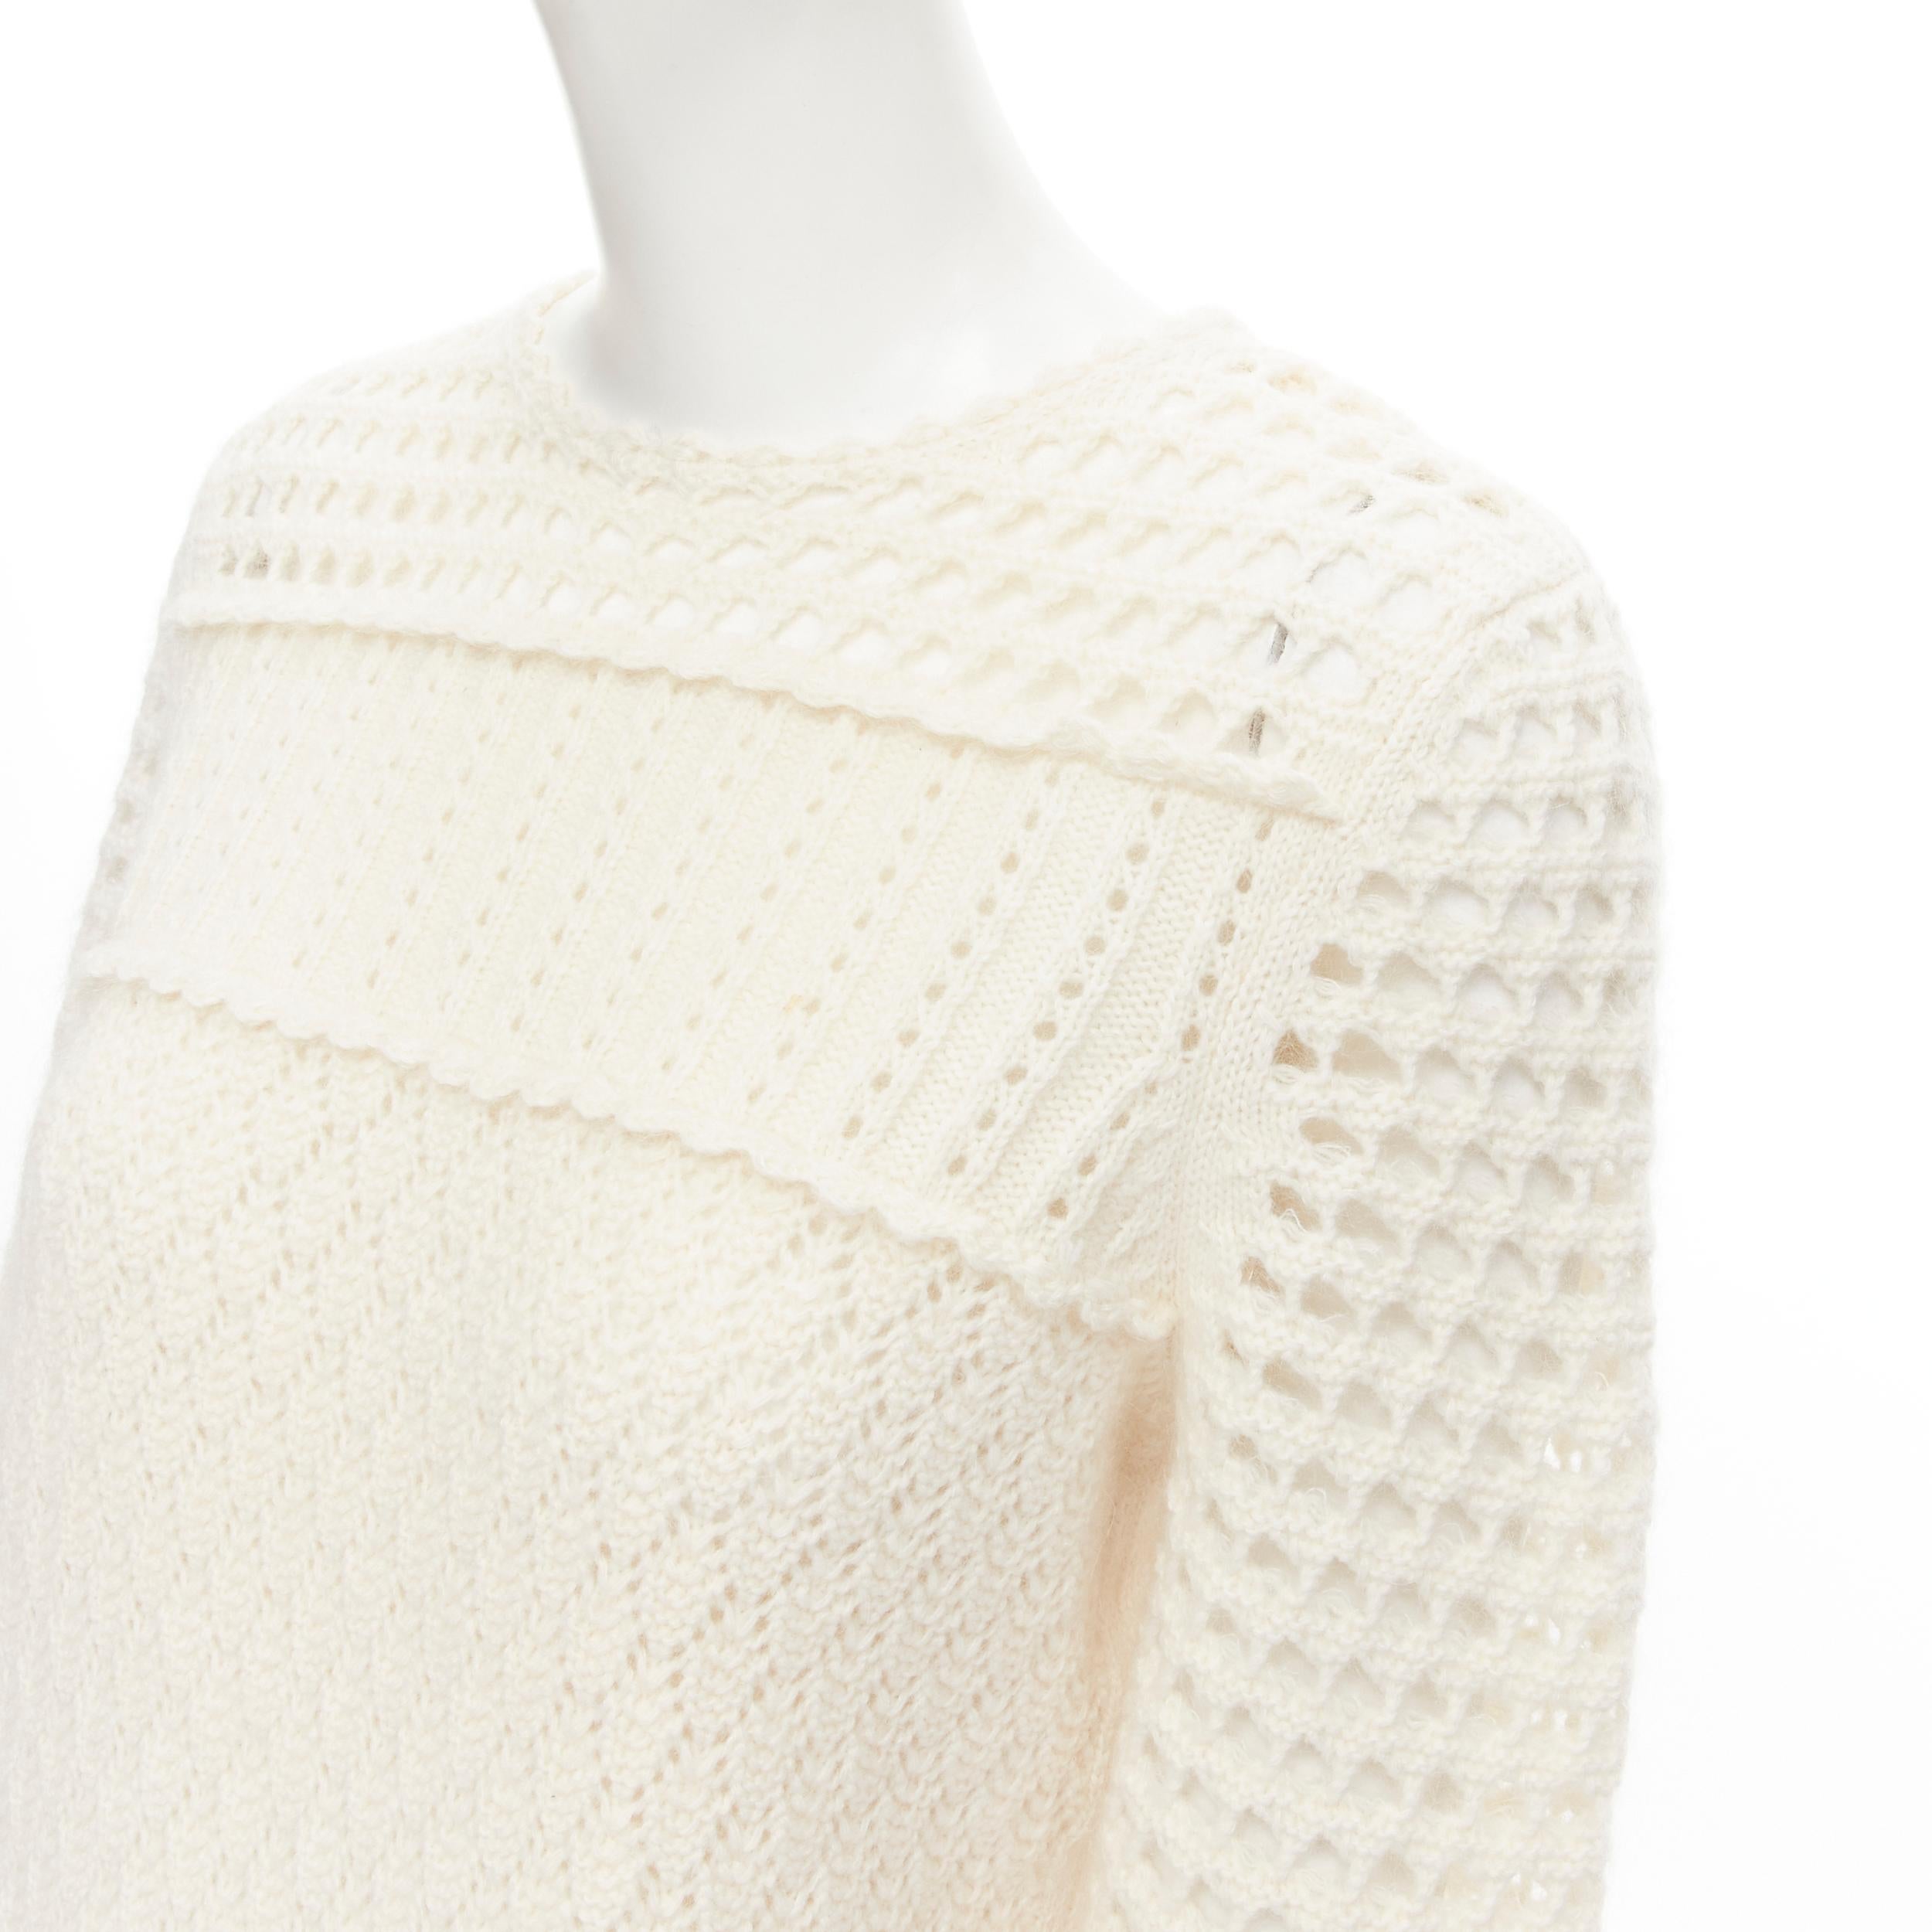 CHRISTIAN DIOR cream wool cashmere mohair crochet mixed chunky knit sweater FR40 M 
Reference: MELK/A00059 
Brand: Christian Dior 
Material: Wool 
Color: Beige 
Pattern: Solid 
Made in: Italy 

CONDITION: 
Condition: Excellent, this item was